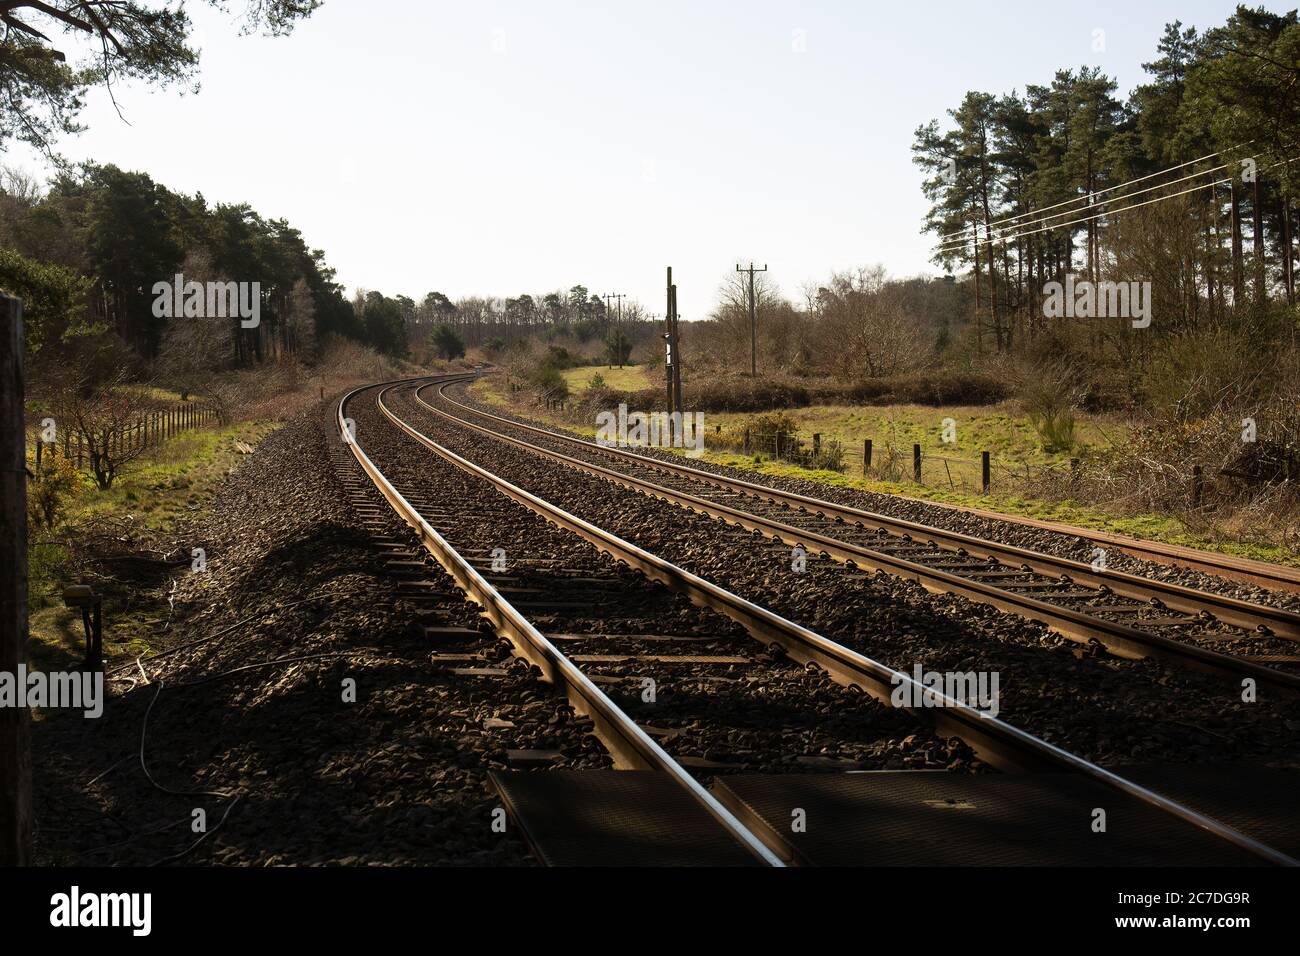 Train tracks curving away to right through forest, no people in view Stock Photo